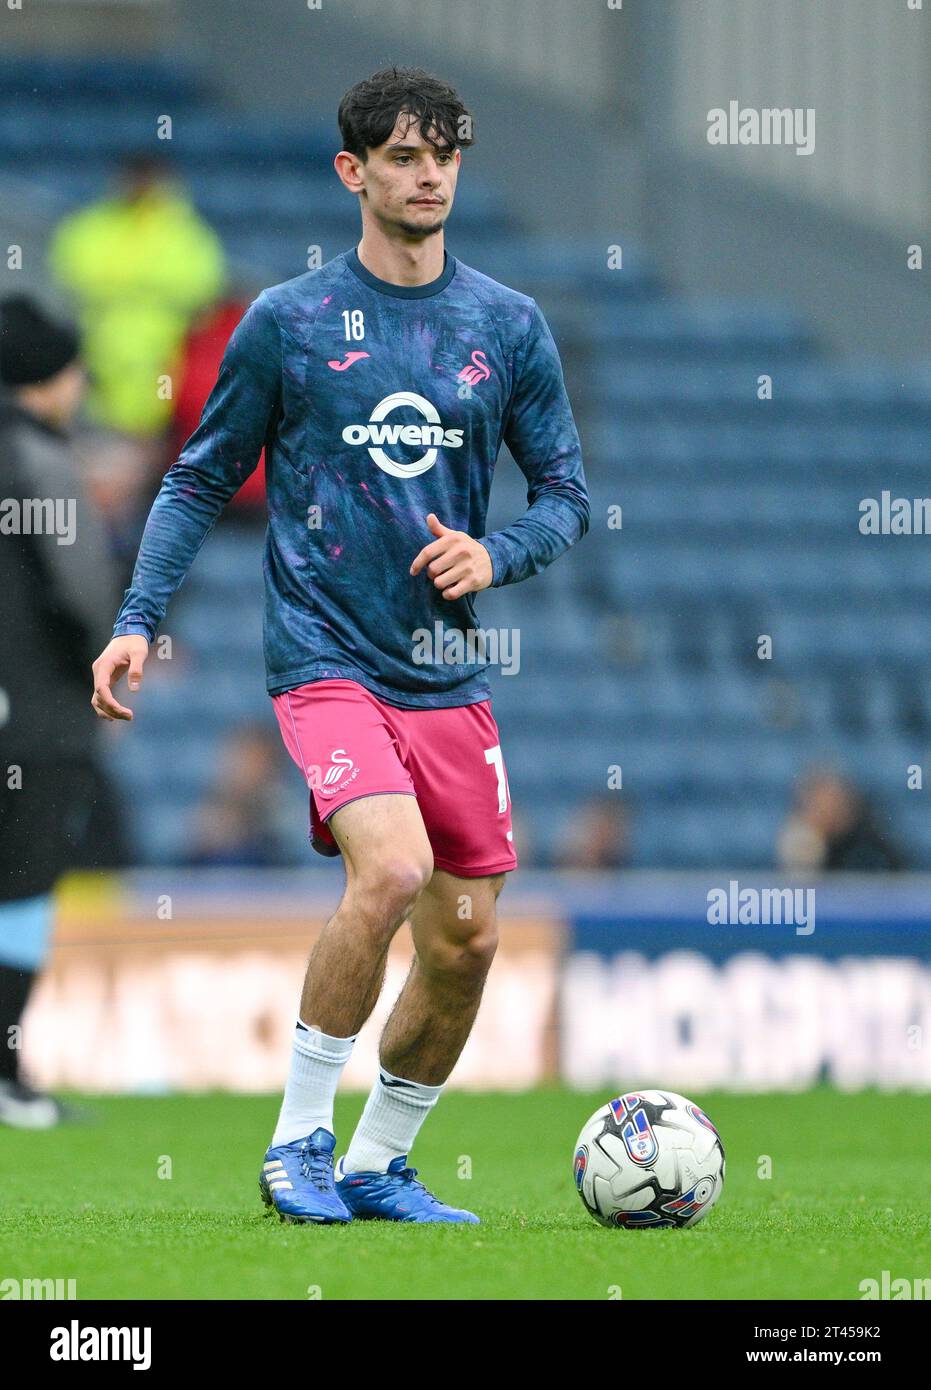 Blackburn, UK. 28th Oct, 2023. Charlie Patino 18# of Swansea City Association Football Club warms up ahead of the match, during the Sky Bet Championship match Blackburn Rovers vs Swansea City at Ewood Park, Blackburn, United Kingdom, 28th October 2023 (Photo by Cody Froggatt/News Images) in Blackburn, United Kingdom on 10/28/2023. (Photo by Cody Froggatt/News Images/Sipa USA) Credit: Sipa USA/Alamy Live News Stock Photo